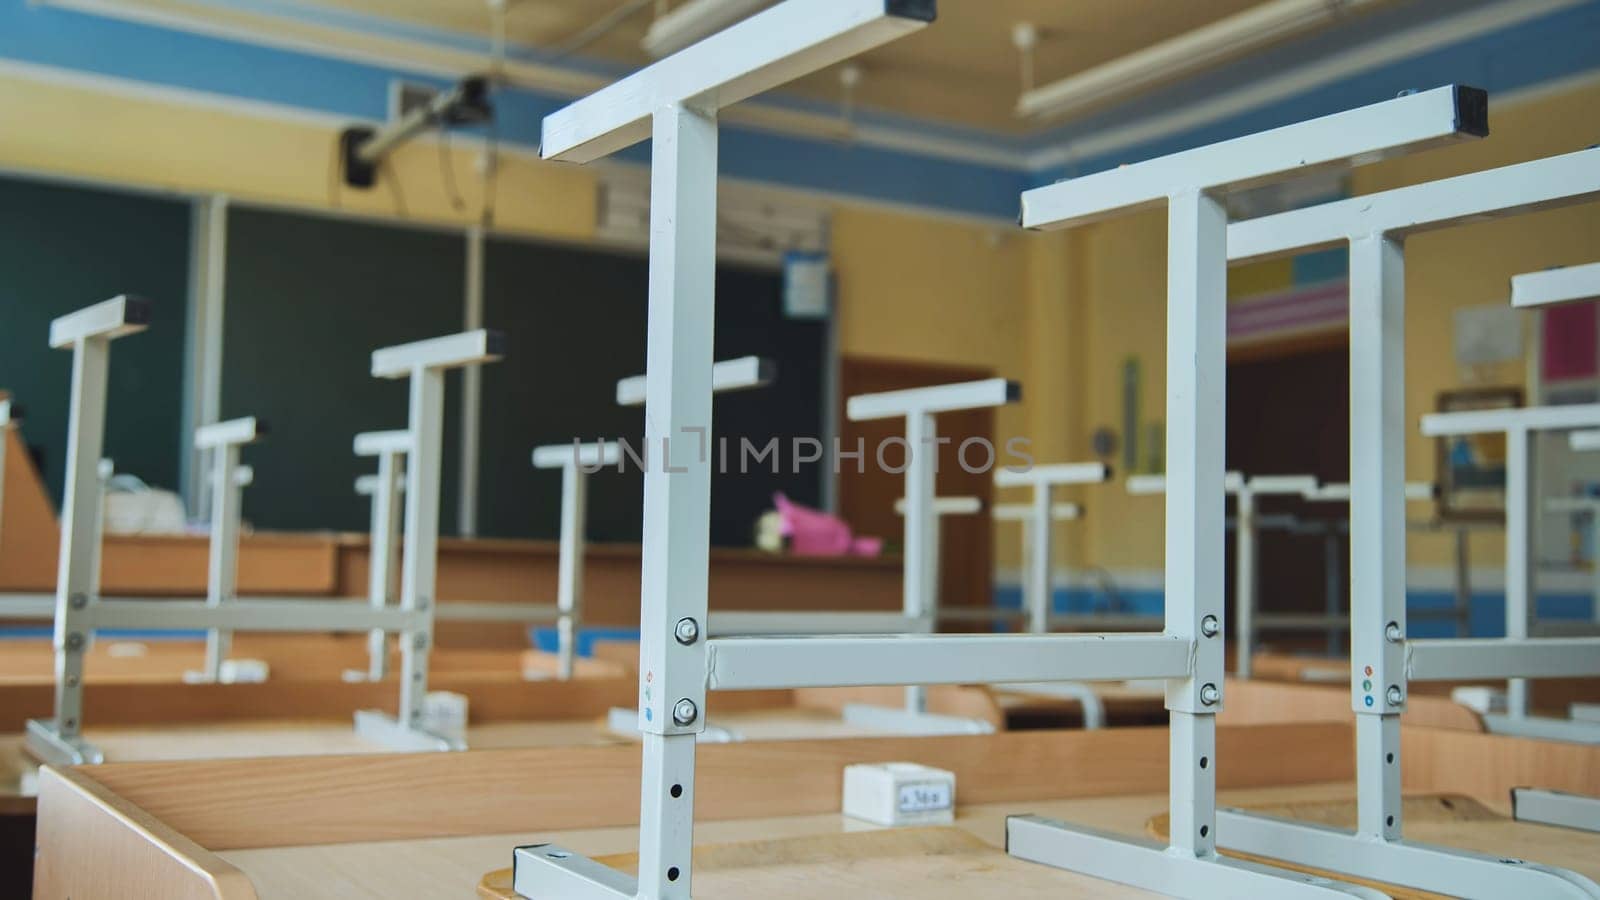 The concept of graduating from high school. Upside-down chairs in an empty classroom at the school. by DovidPro